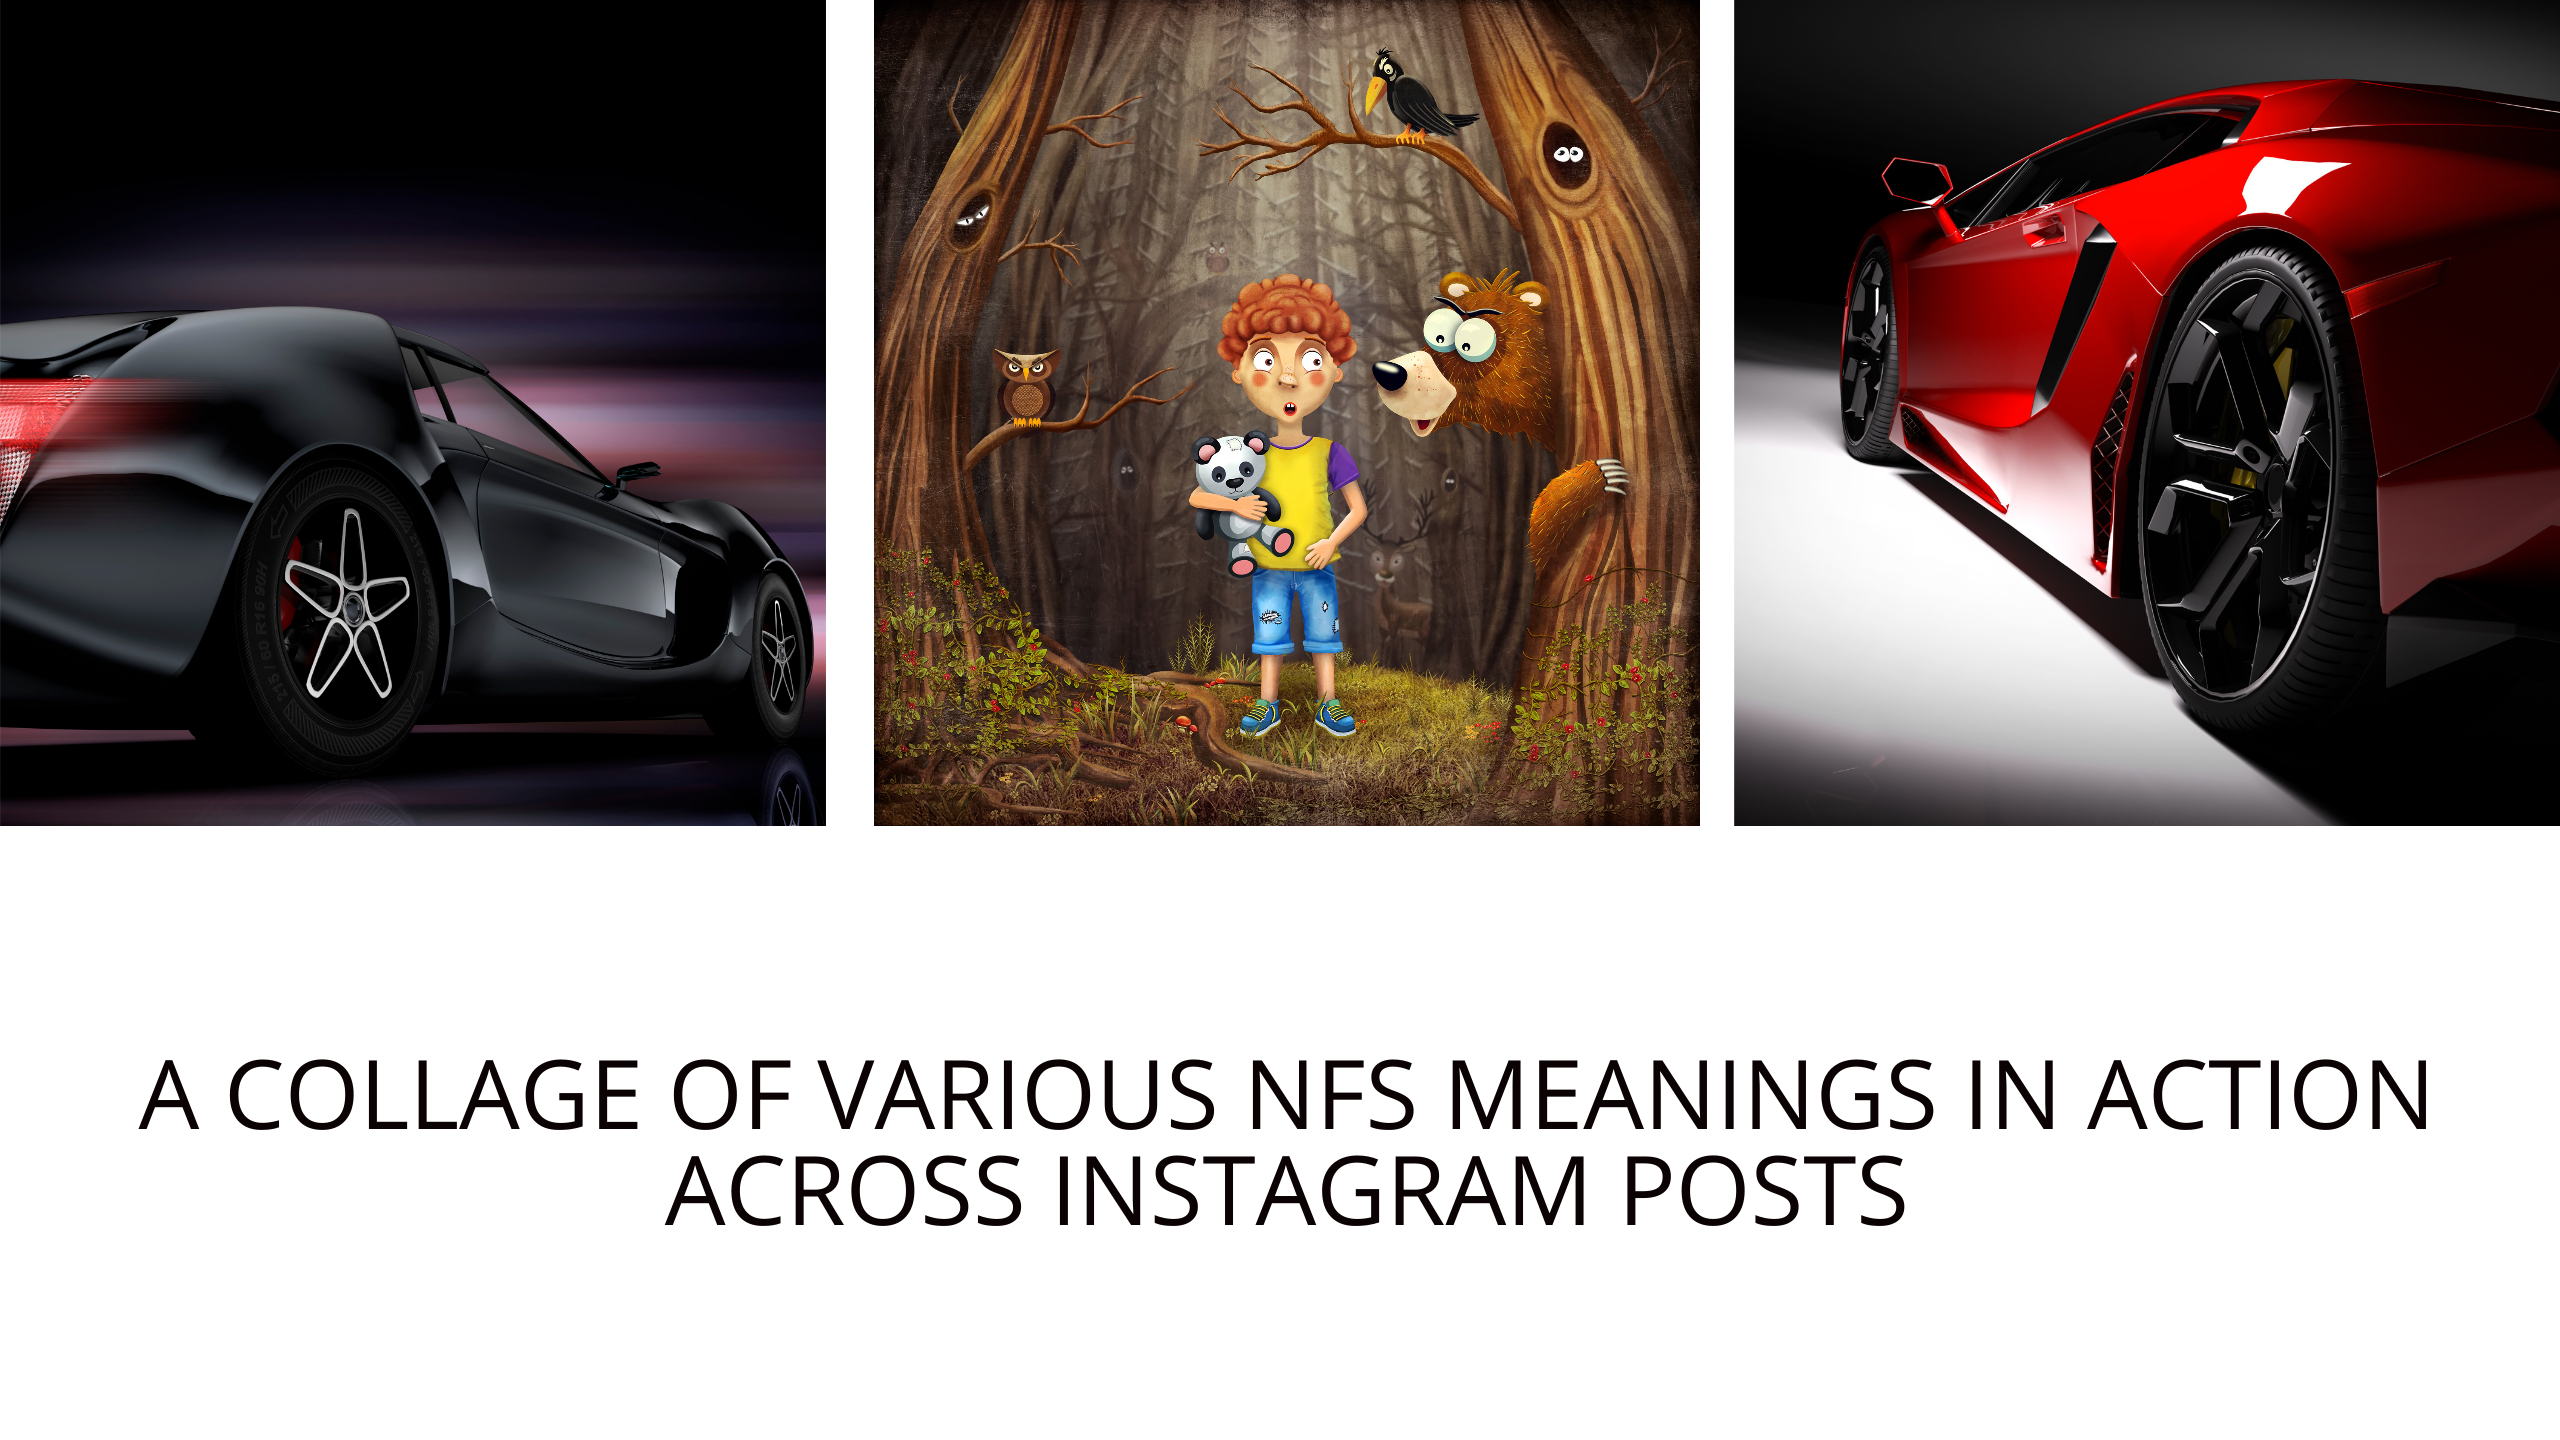 A collage of various NFS meanings in action across Instagram posts.